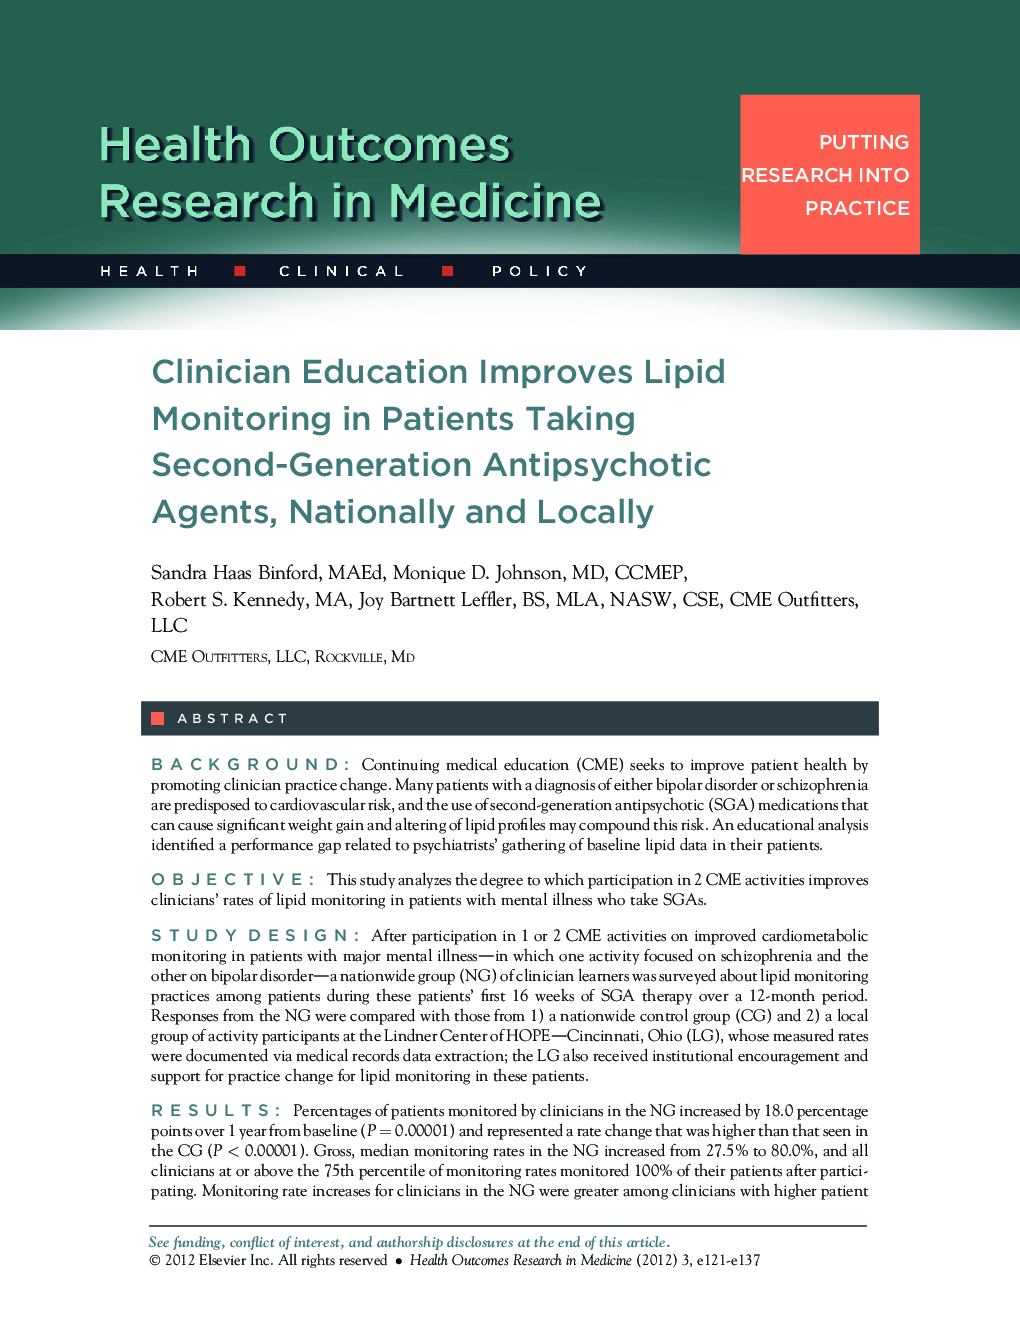 Clinician Education Improves Lipid Monitoring in Patients Taking Second-Generation Antipsychotic Agents, Nationally and Locally 